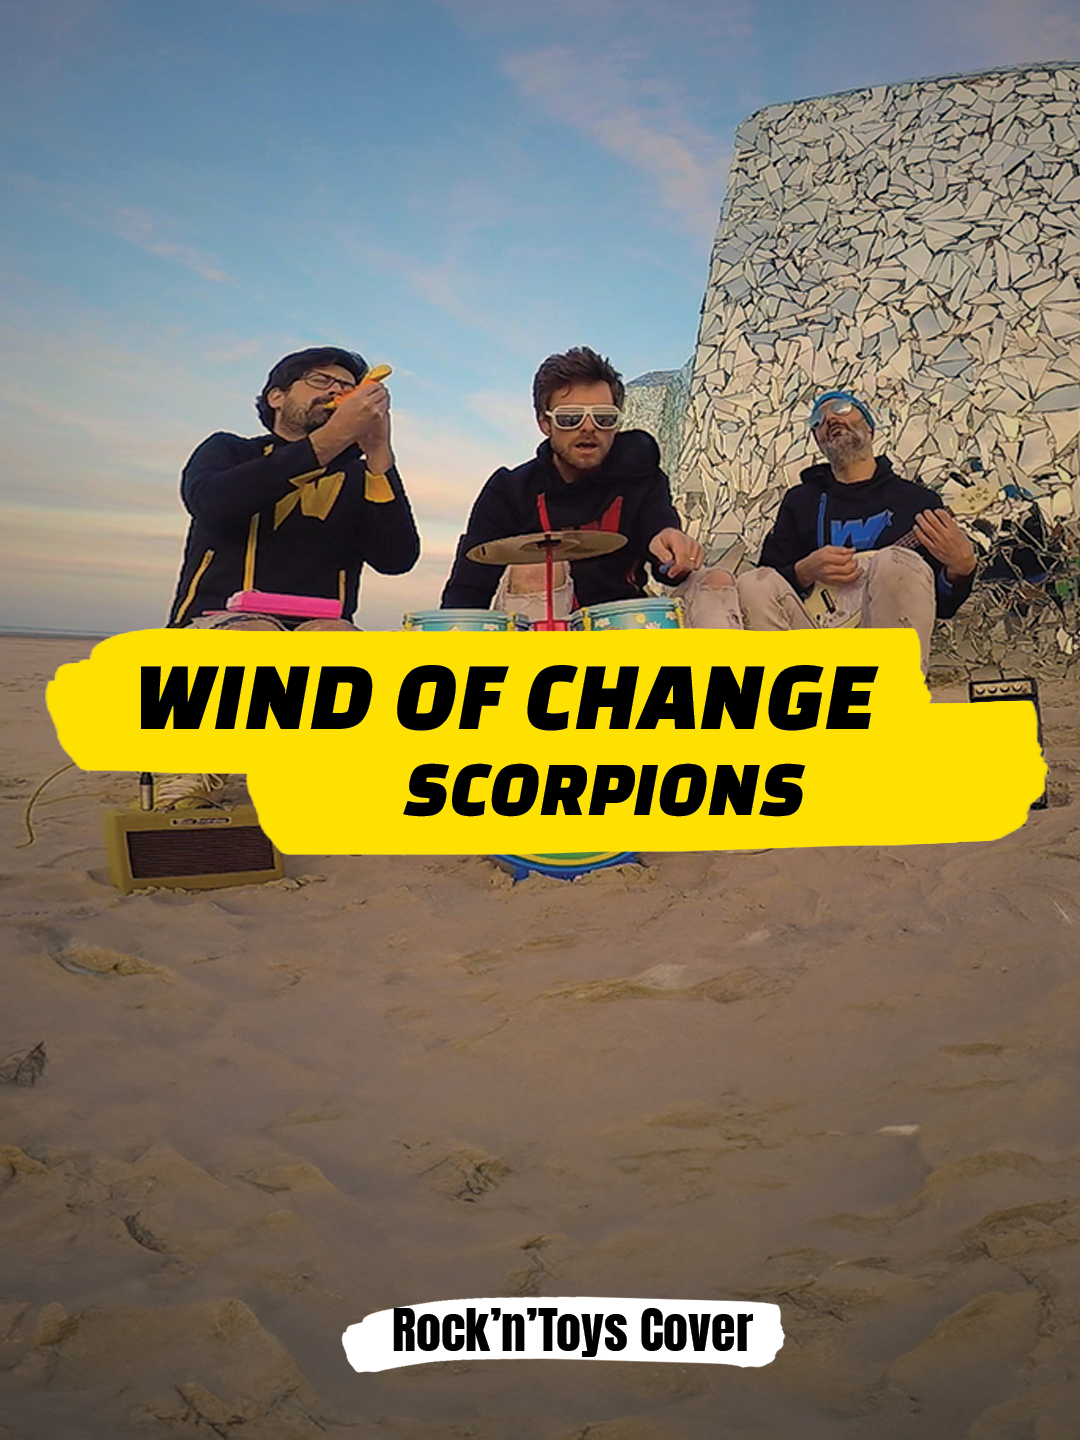 Wind of Change - SCORPIONS Rock'n'Toys Cover by THE WACKIDS 👉 Full video available on Youtube! (🔗 Link in bio) 👉 FOLLOW for more Rock'n'Toys 🤘 We do not own the music (Scorpions / Klaus Meine) #thewackids #wackids #rockntoys #cover #rock #rockcover #windofchange #scorpions